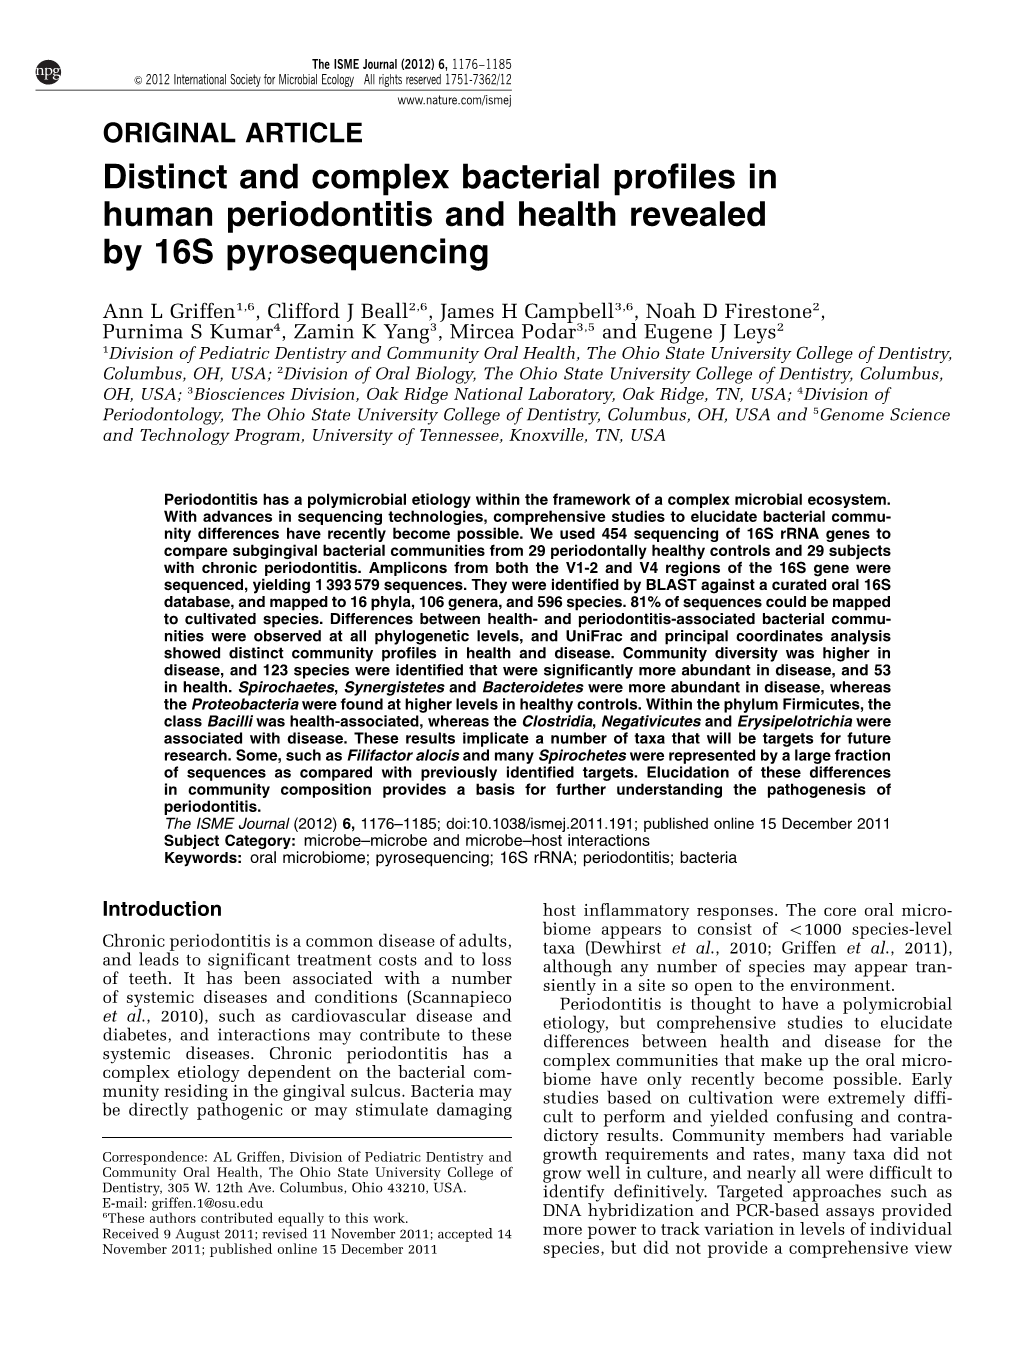 Distinct and Complex Bacterial Profiles in Human Periodontitis and Health Revealed by 16S Pyrosequencing